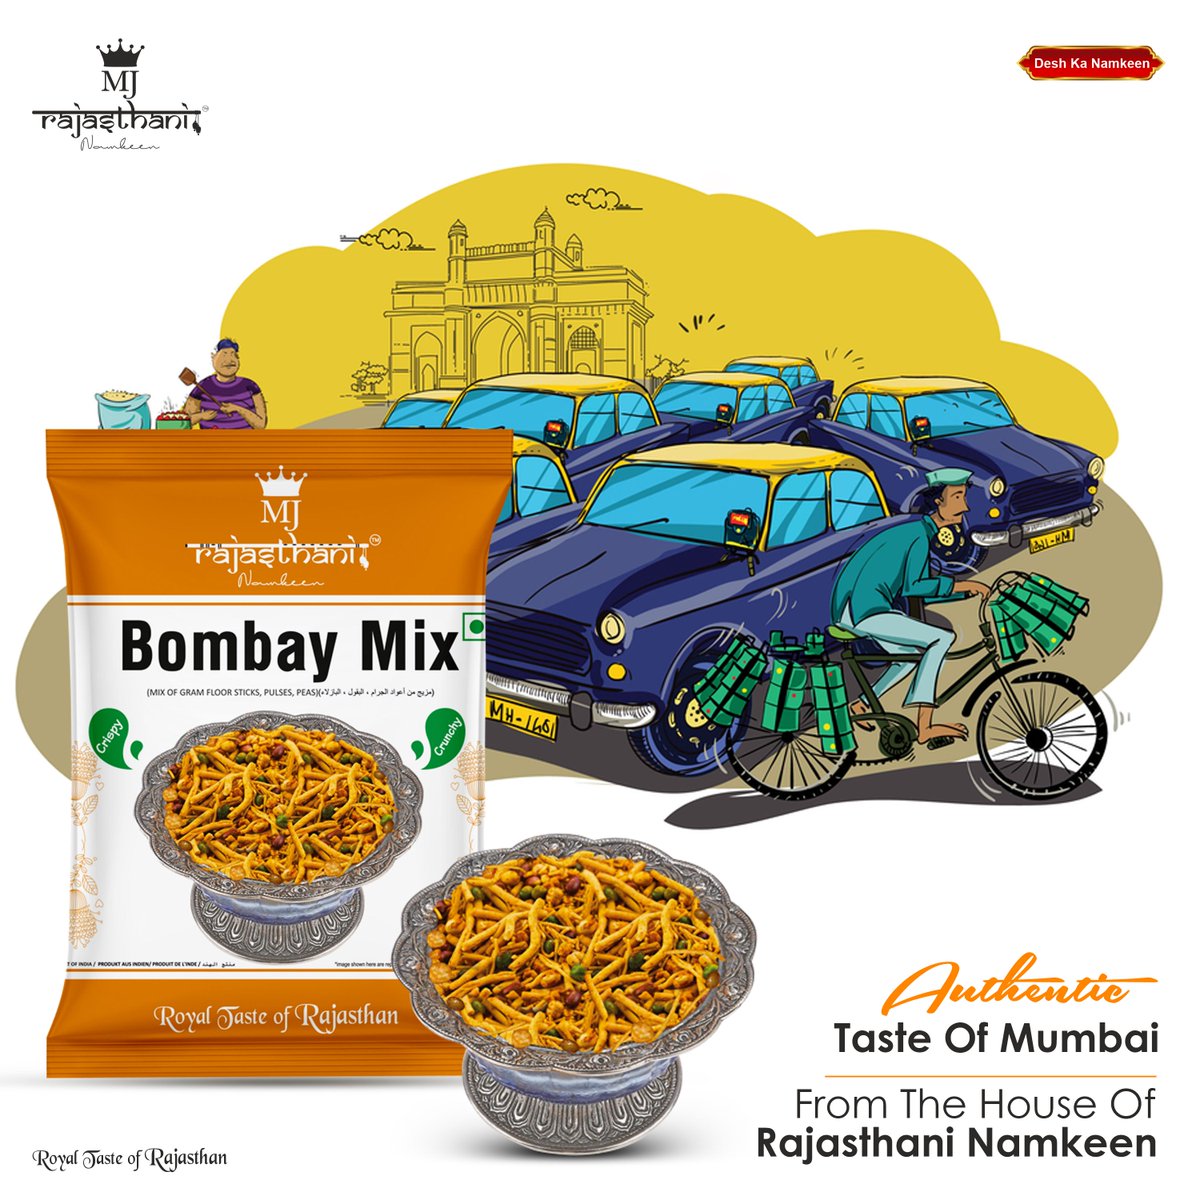 In every pack of Bombay Mix, you'll find more than just a snack, you'll discover a bridge between the royal taste of Rajasthan and the street food stalls of Mumbai.

🌐  rajasthaninamkeen.com
📱  +91 7328 822 333

#MJRajasthaniNamkeen #DeshKaNamkeen #BombayMix #TasteOfMumbai